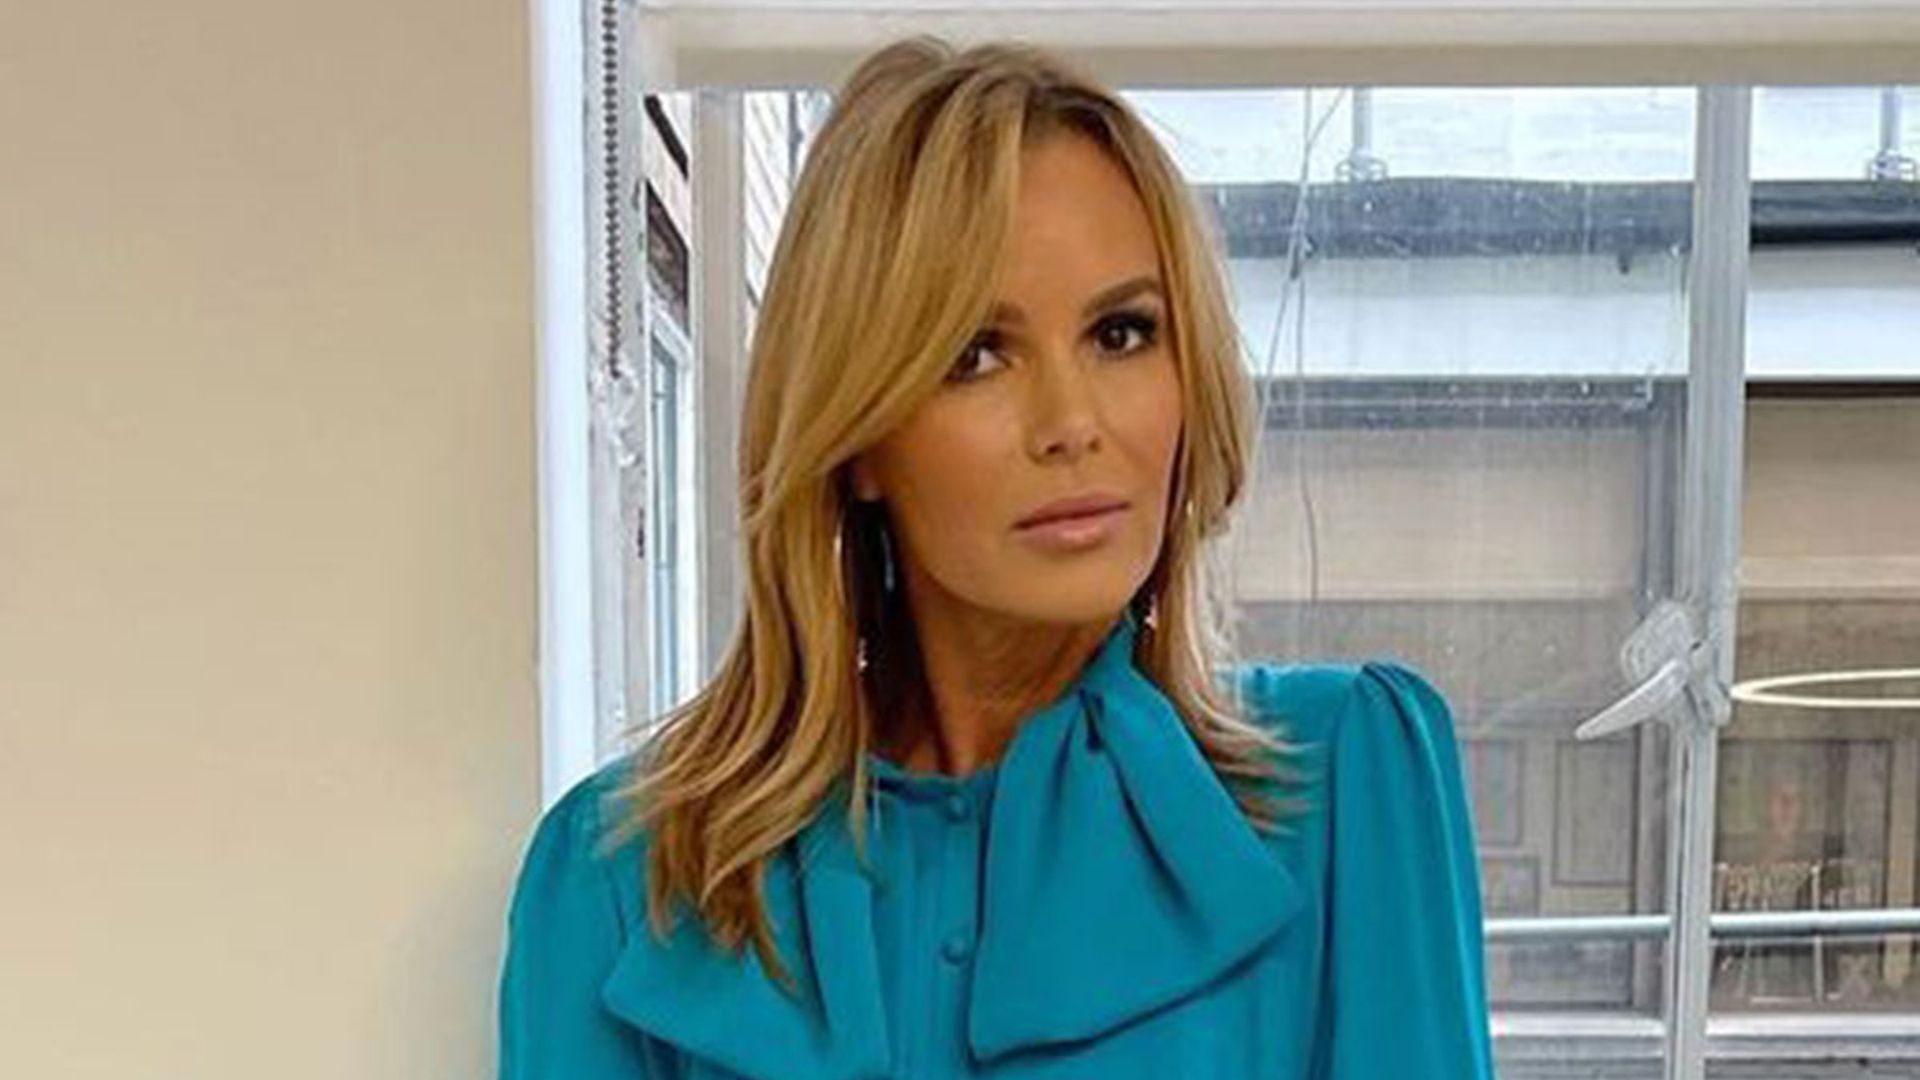 Amanda Holden shares intimate bedroom photo to reveal exciting news